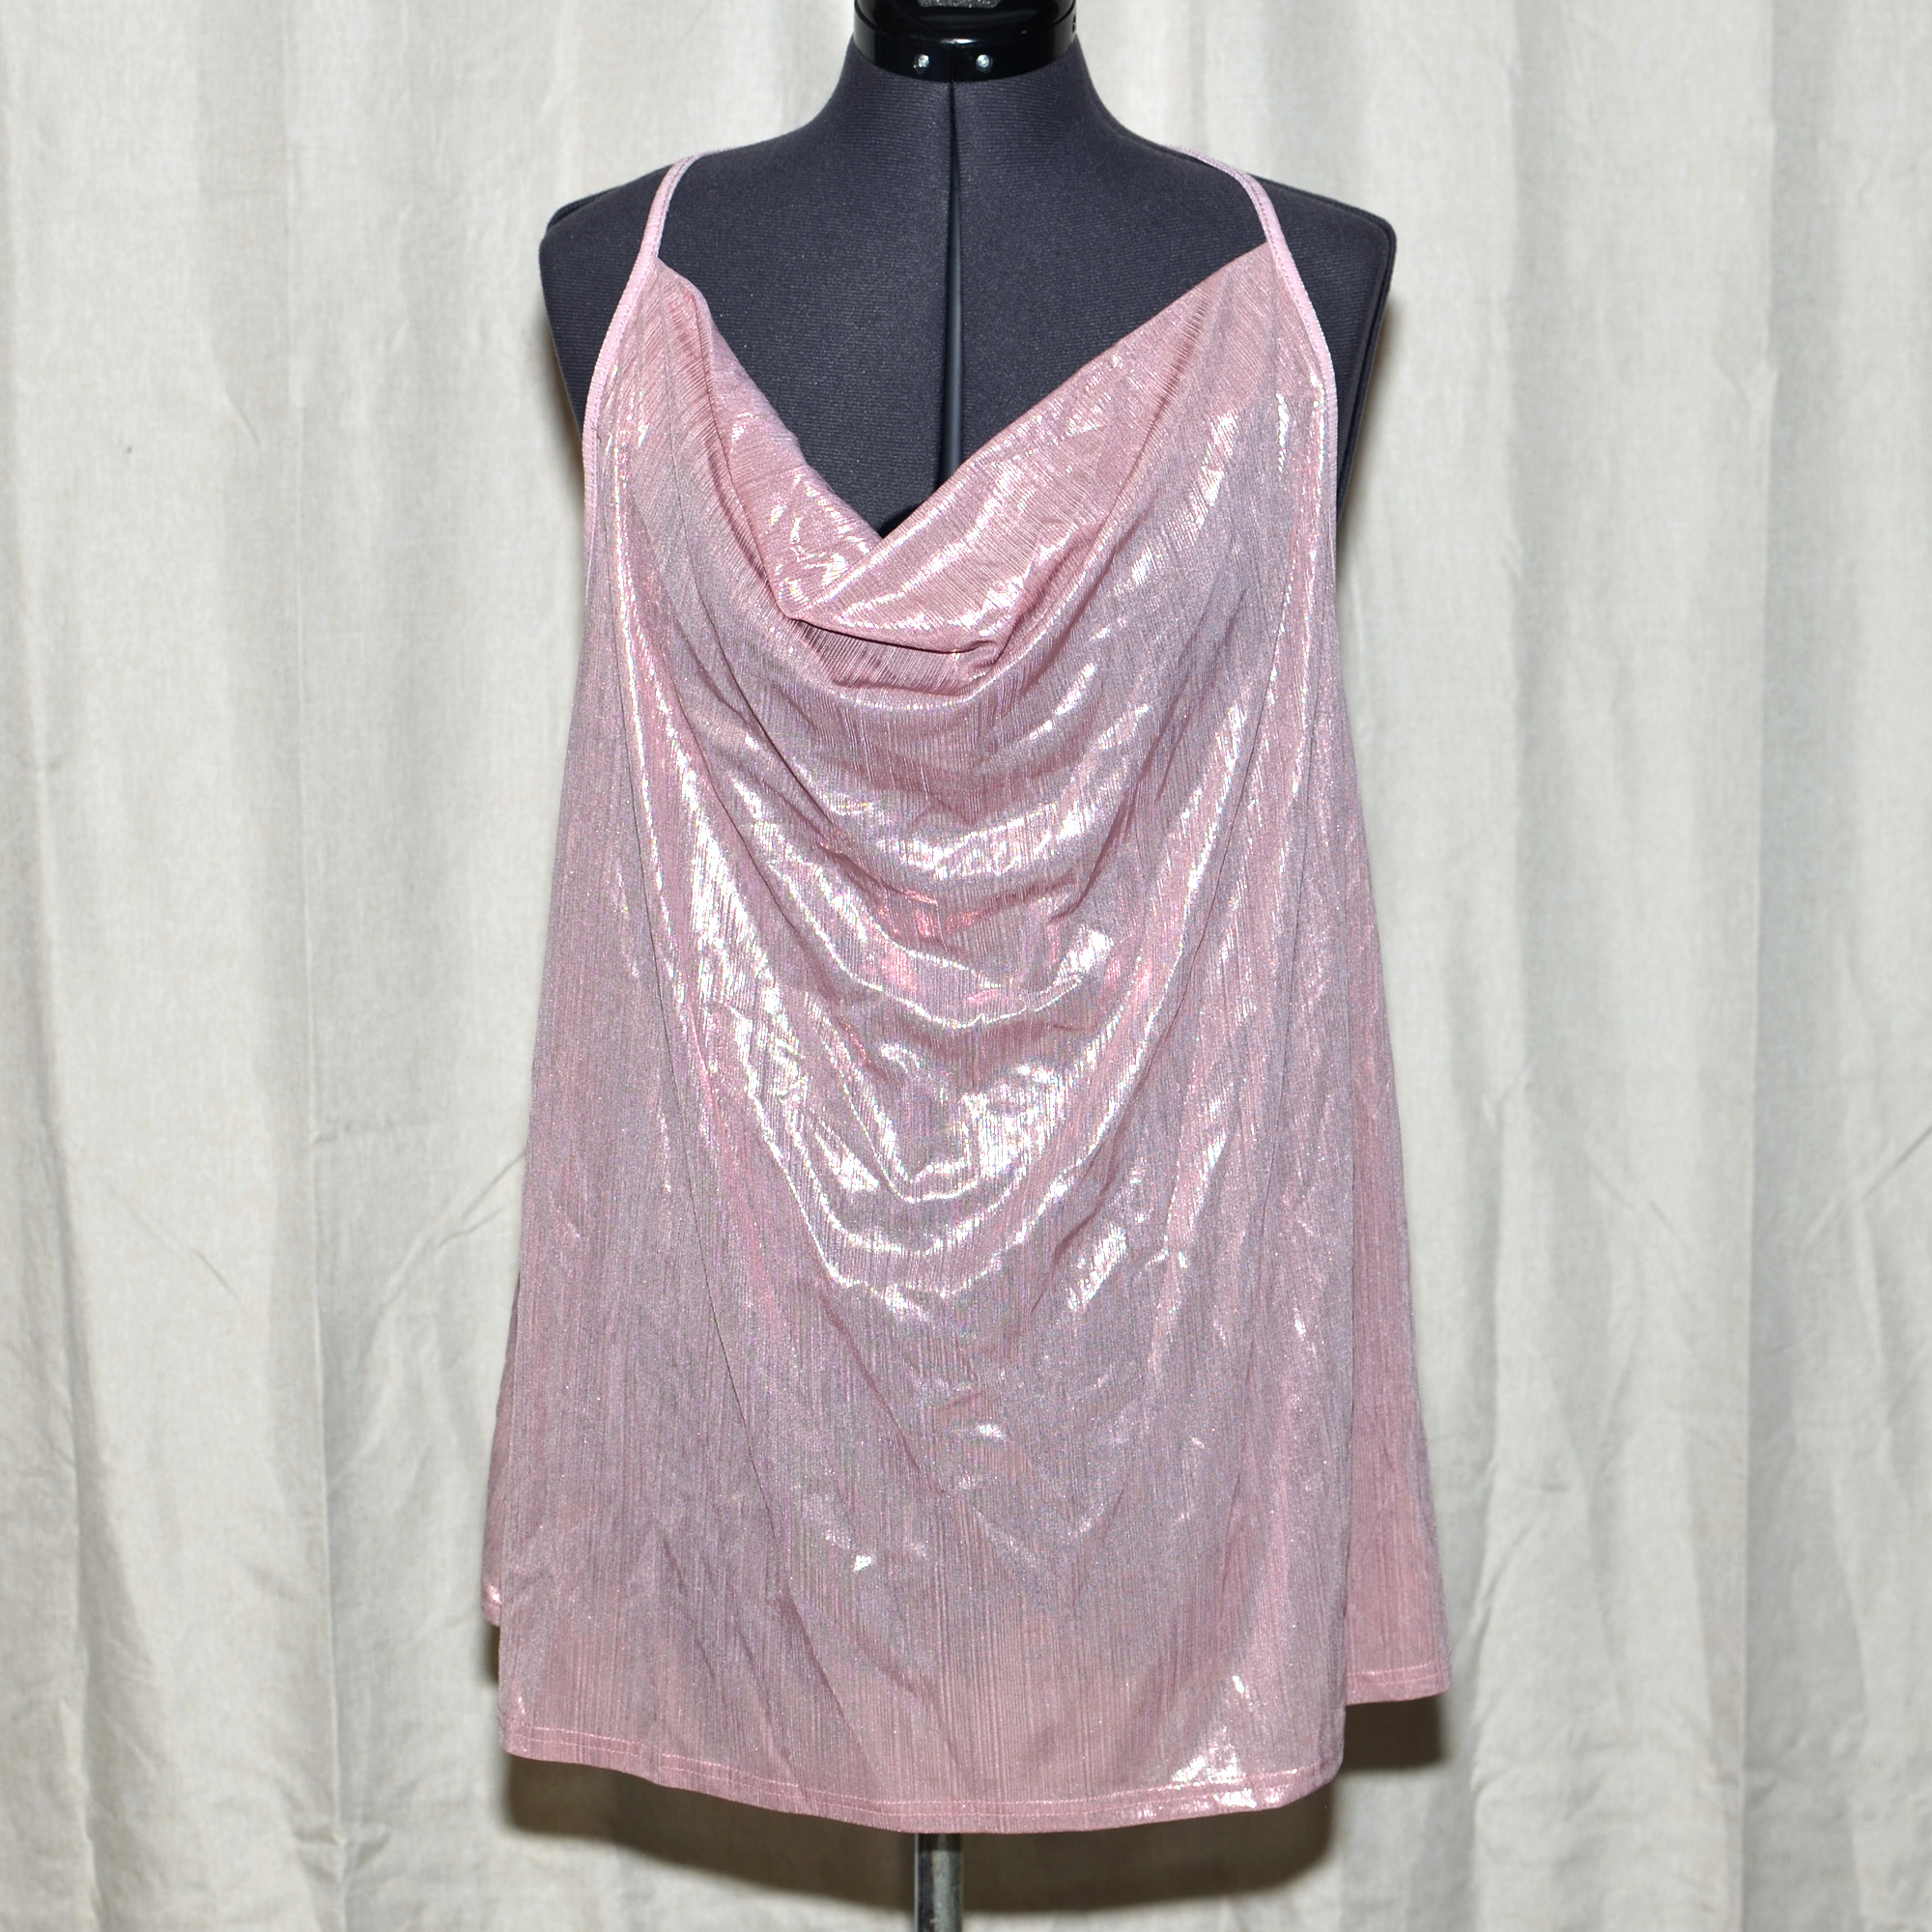 Champagne blush pink color metallic sparkle tank top with scooping cowl neckline.